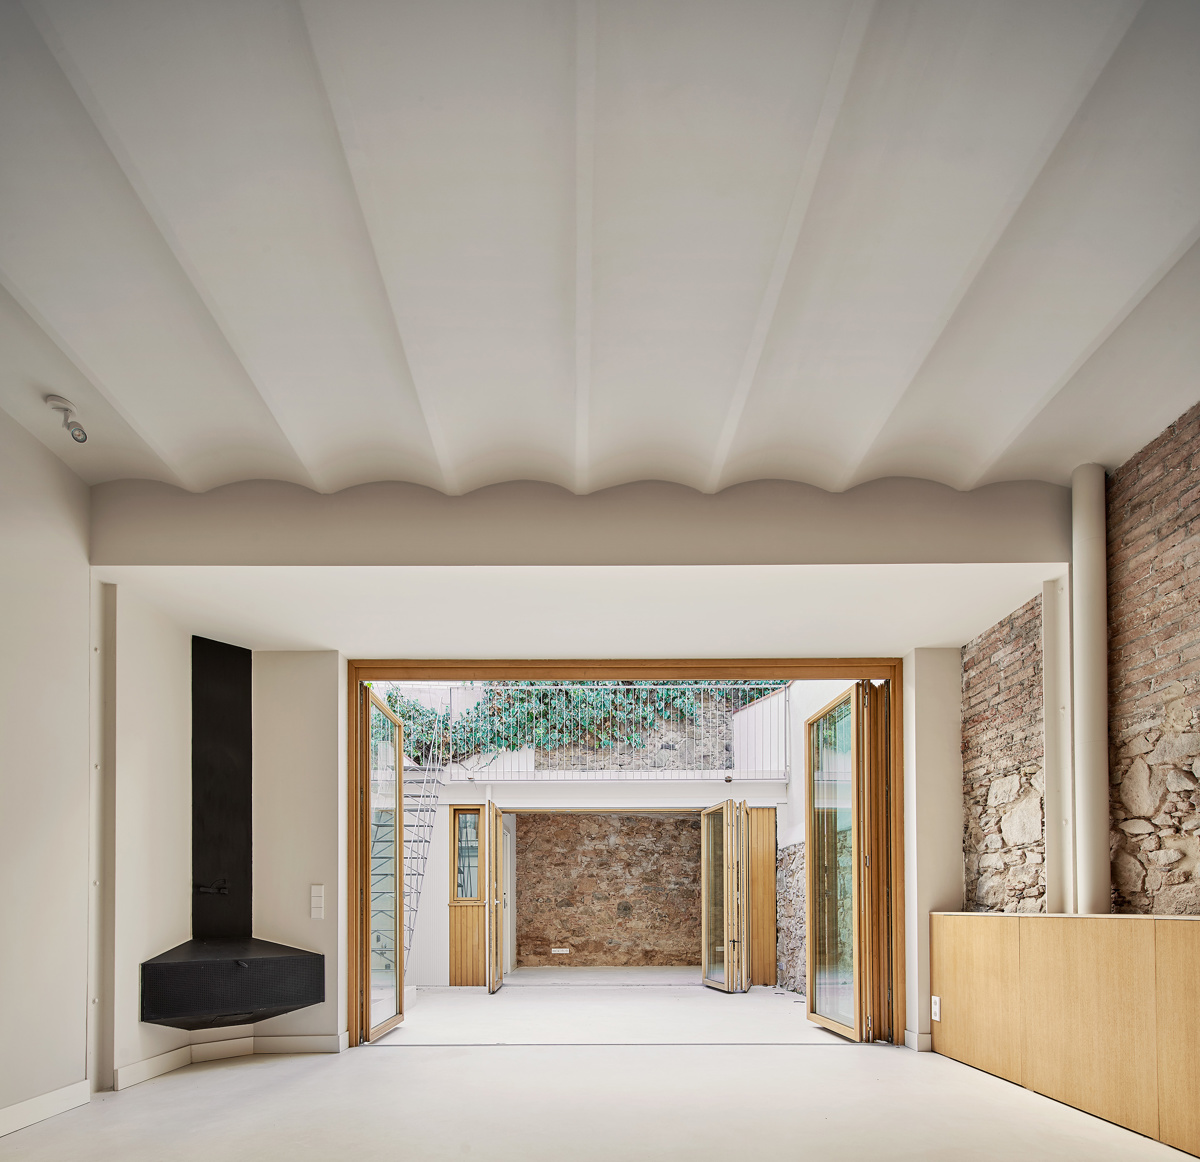  MIQ. Restoration of a single-family house in the old quarter of Sarrià.